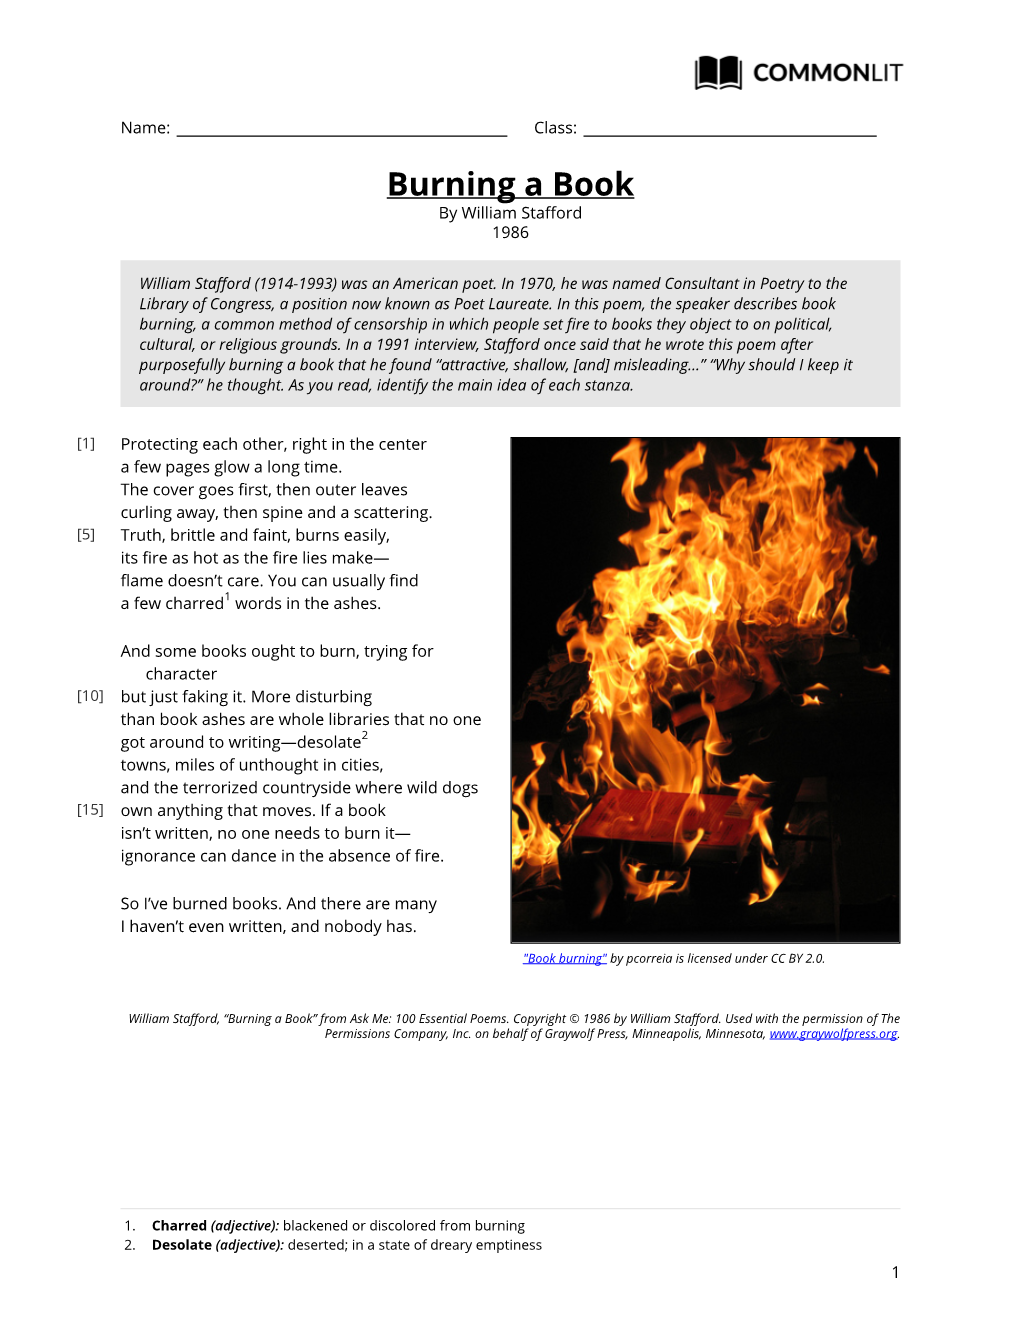 Commonlit | Burning a Book